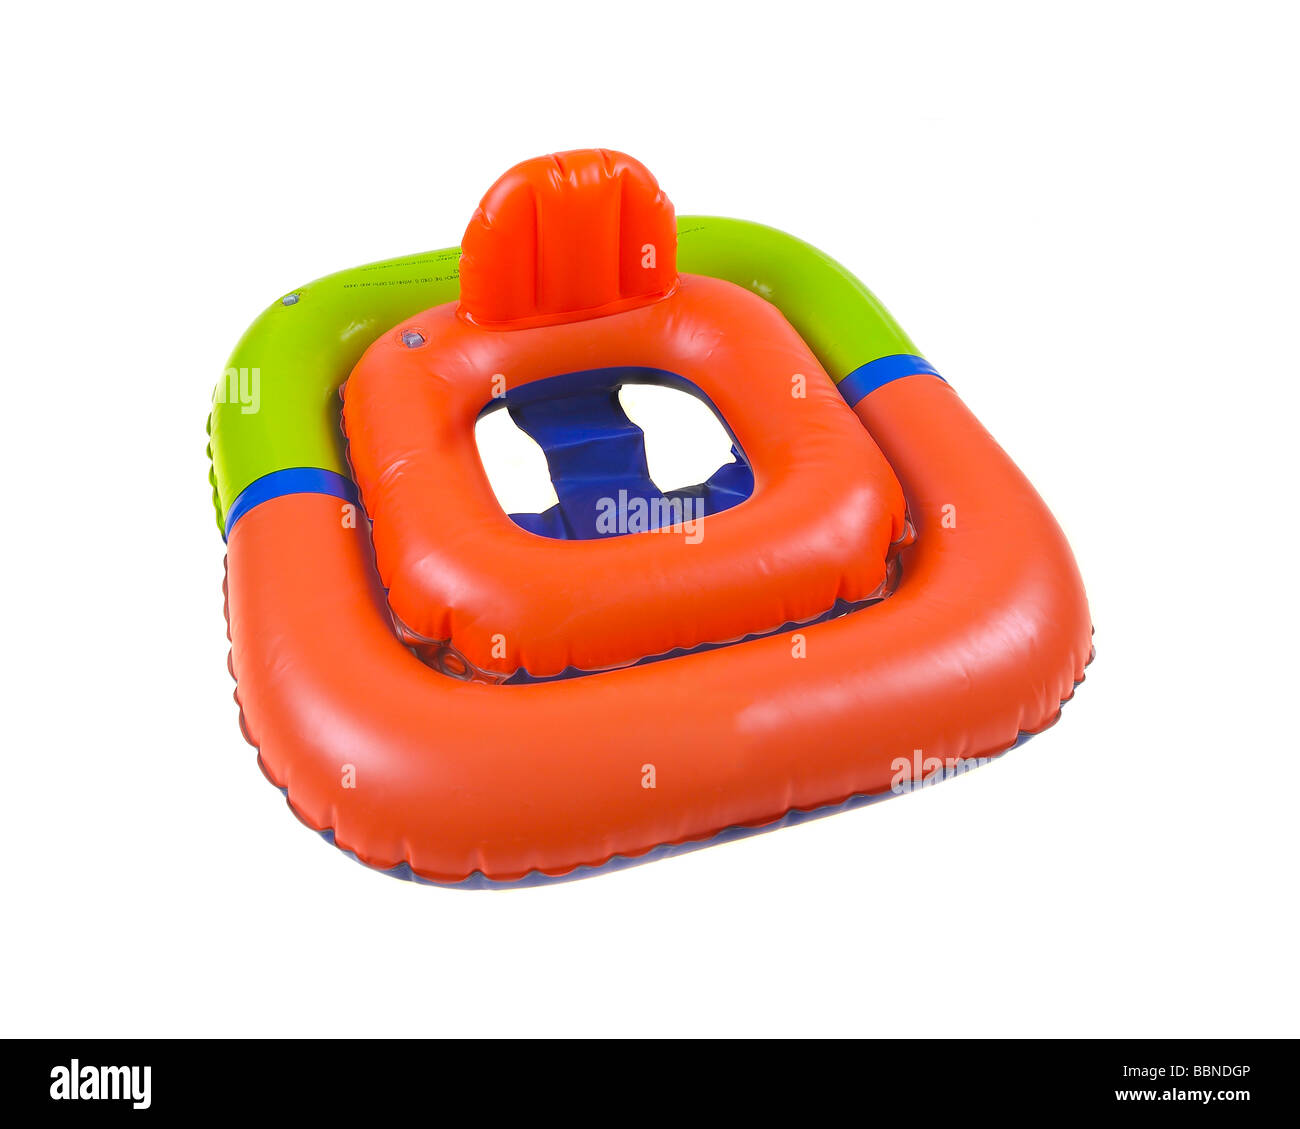 COLOURFUL CHILDS INFLATABLE FLOATATION RING Stock Photo